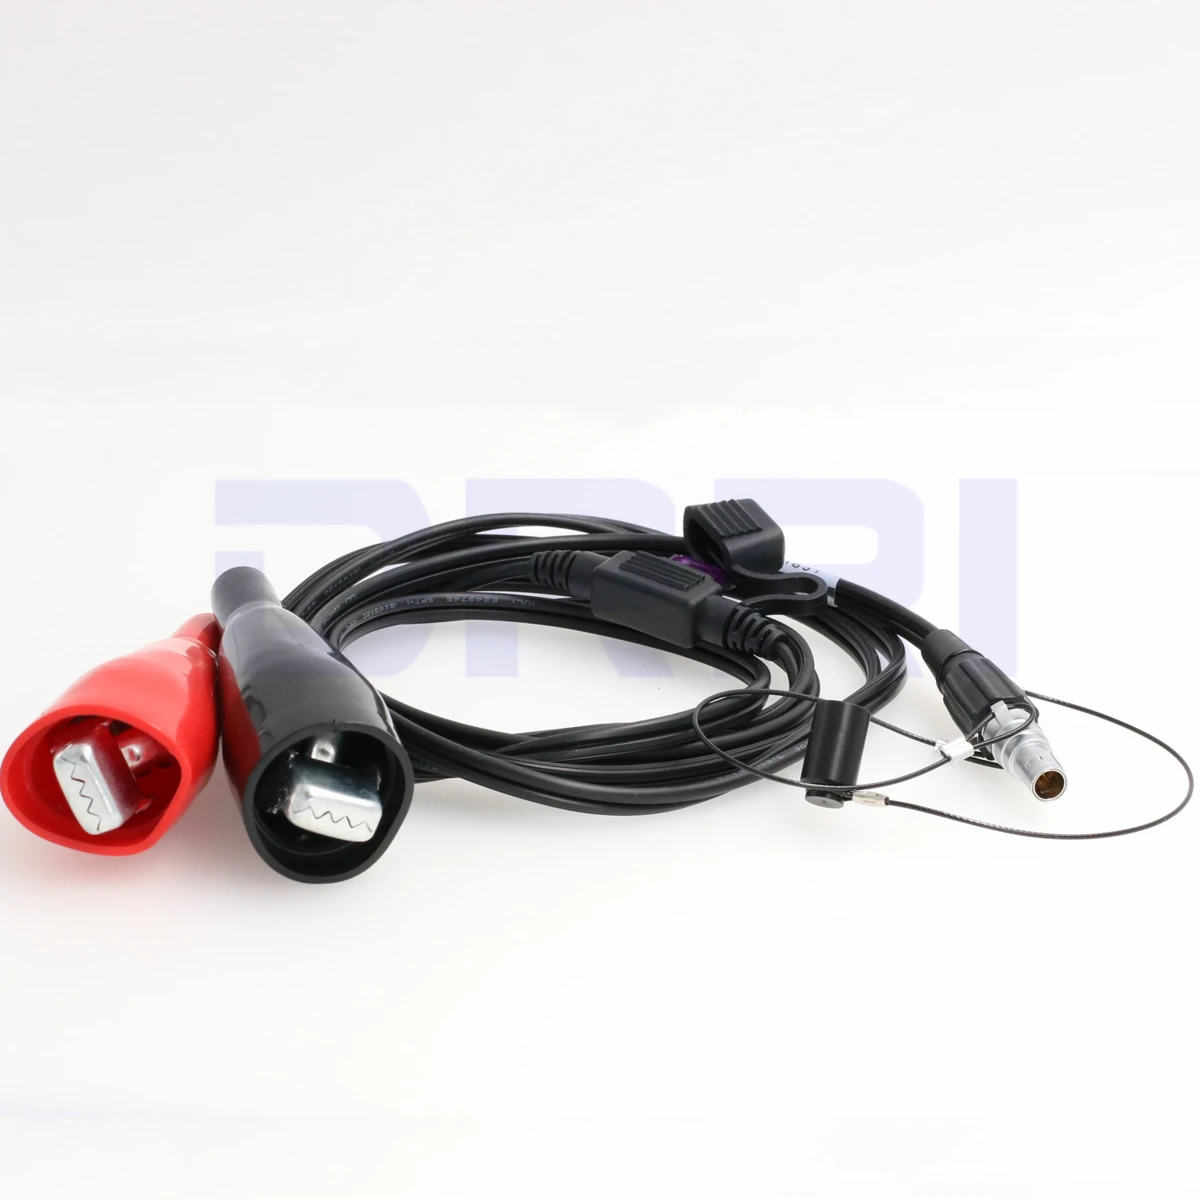 

12V GPS Power Cable For Trimble R10 GNSS R8 R7 R6 4700 4800 5700 5800 46125-20